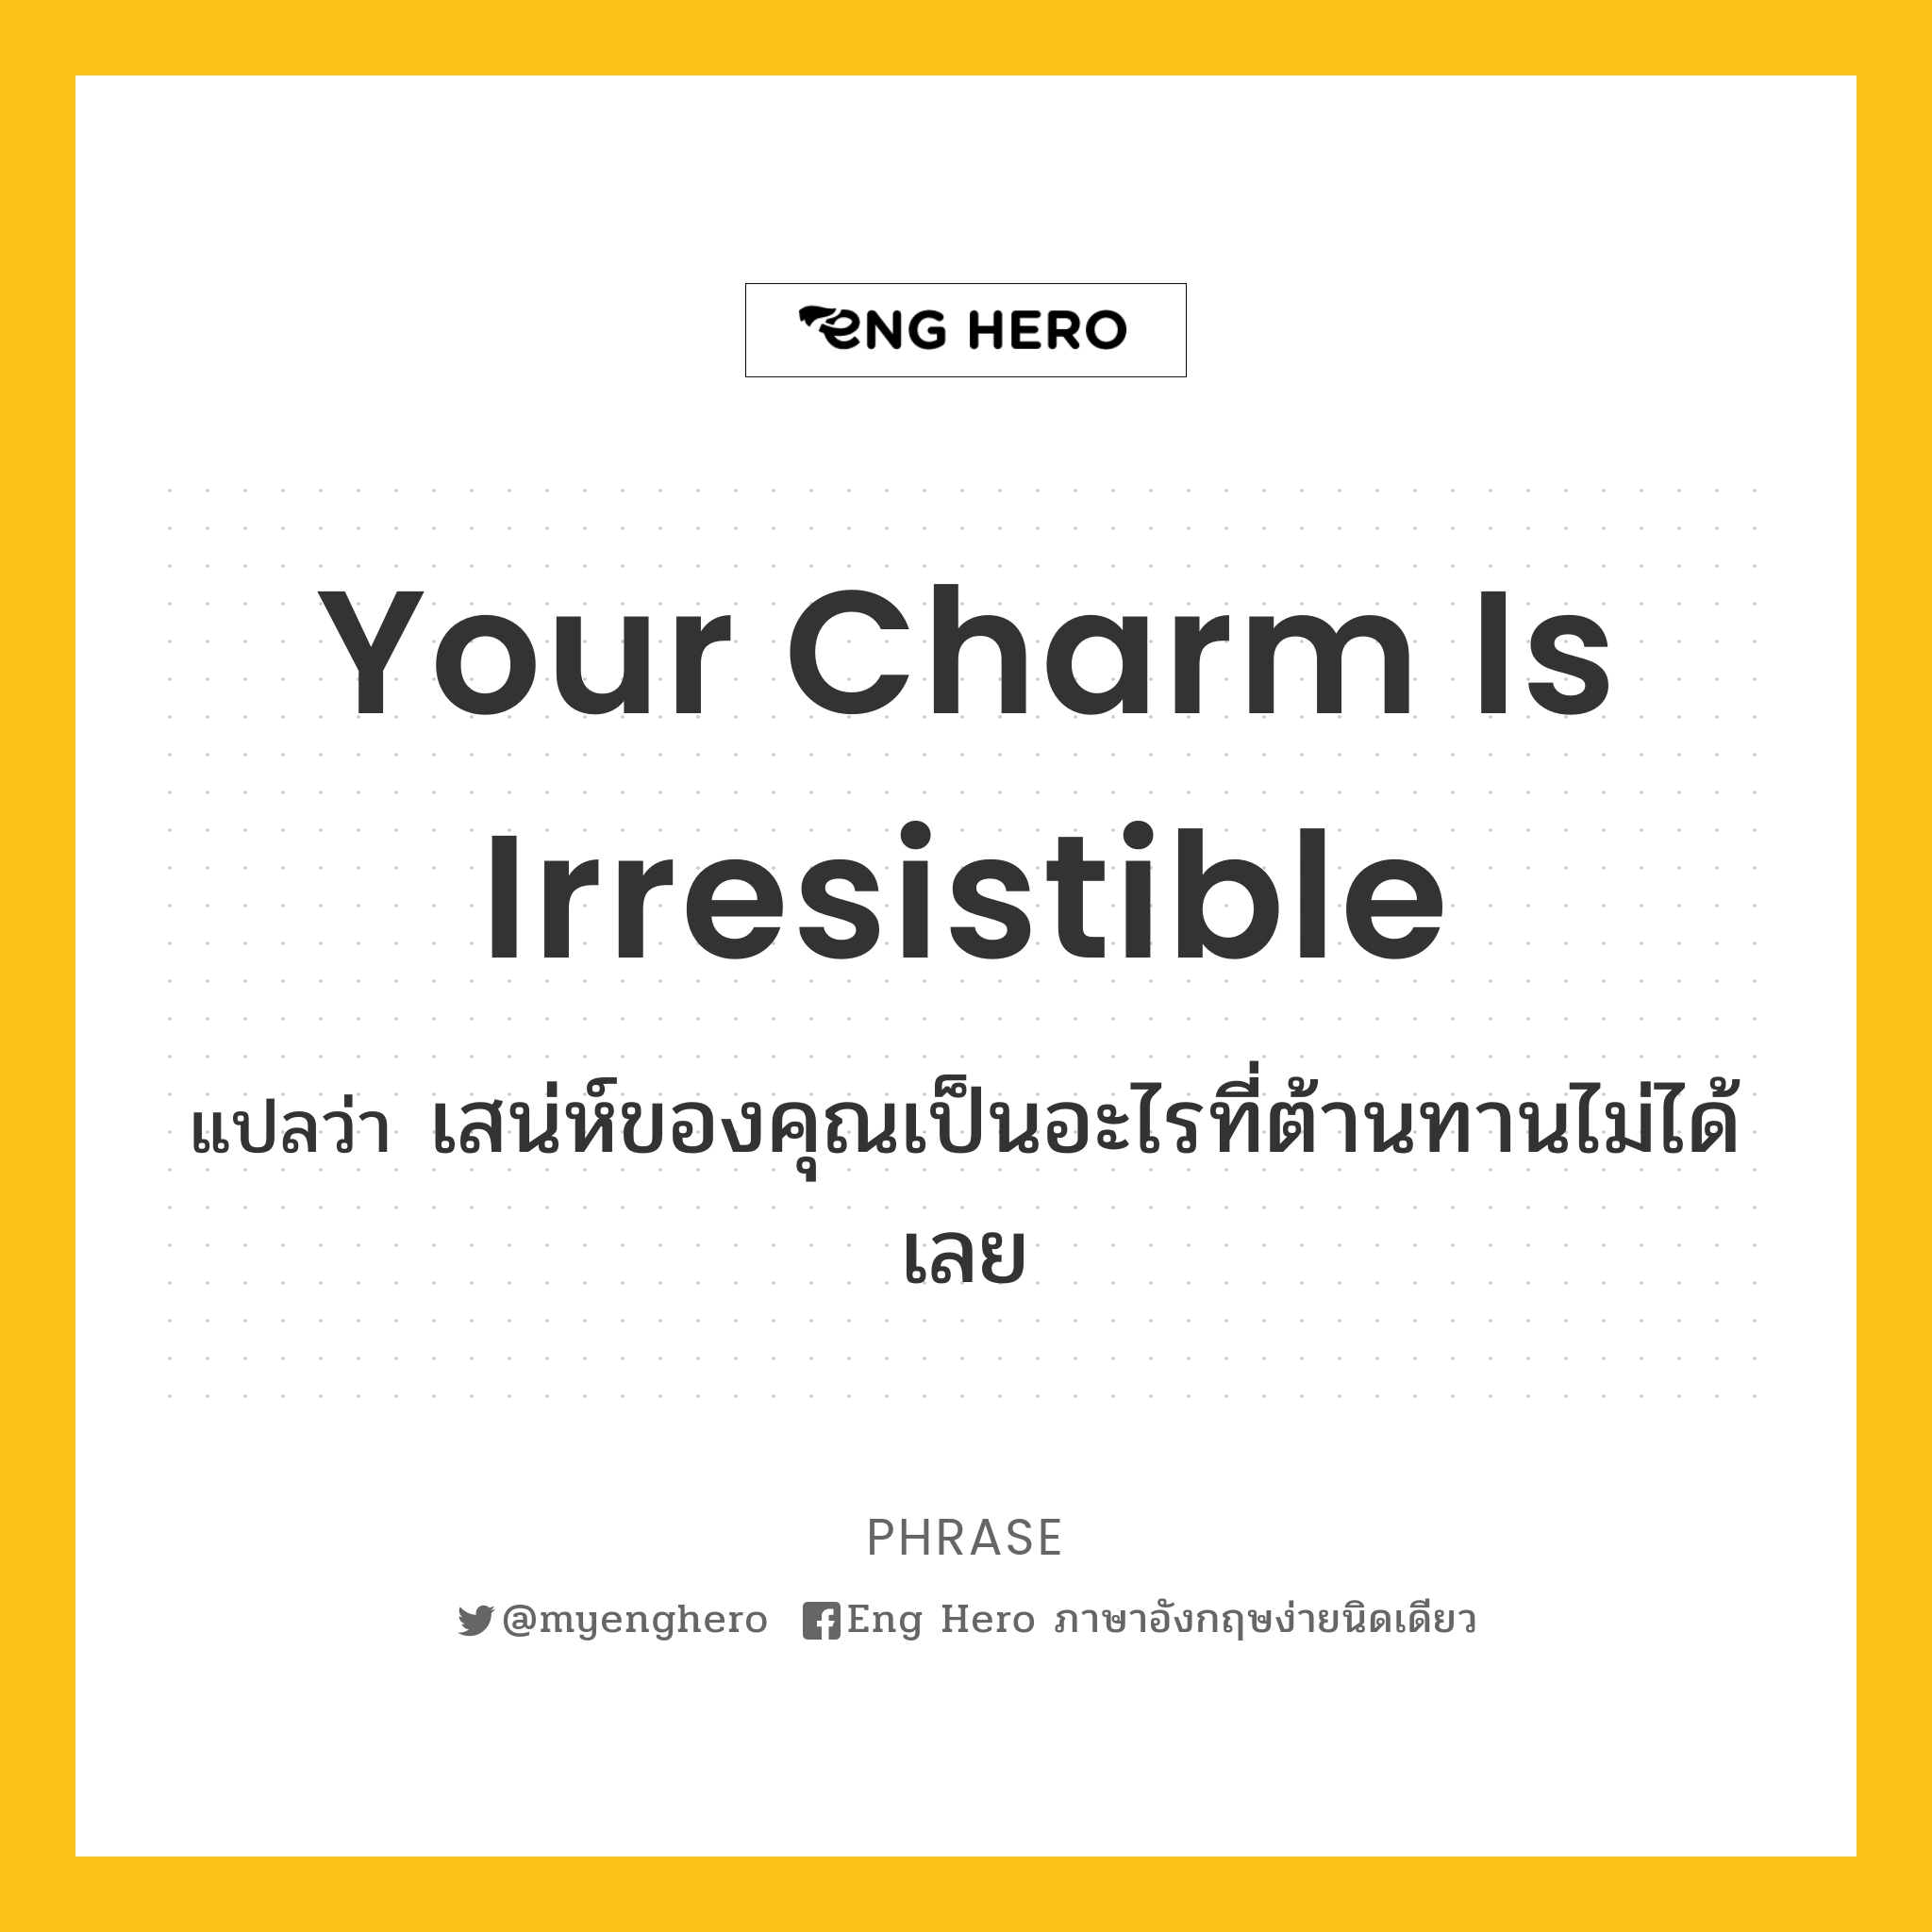 Your charm is irresistible